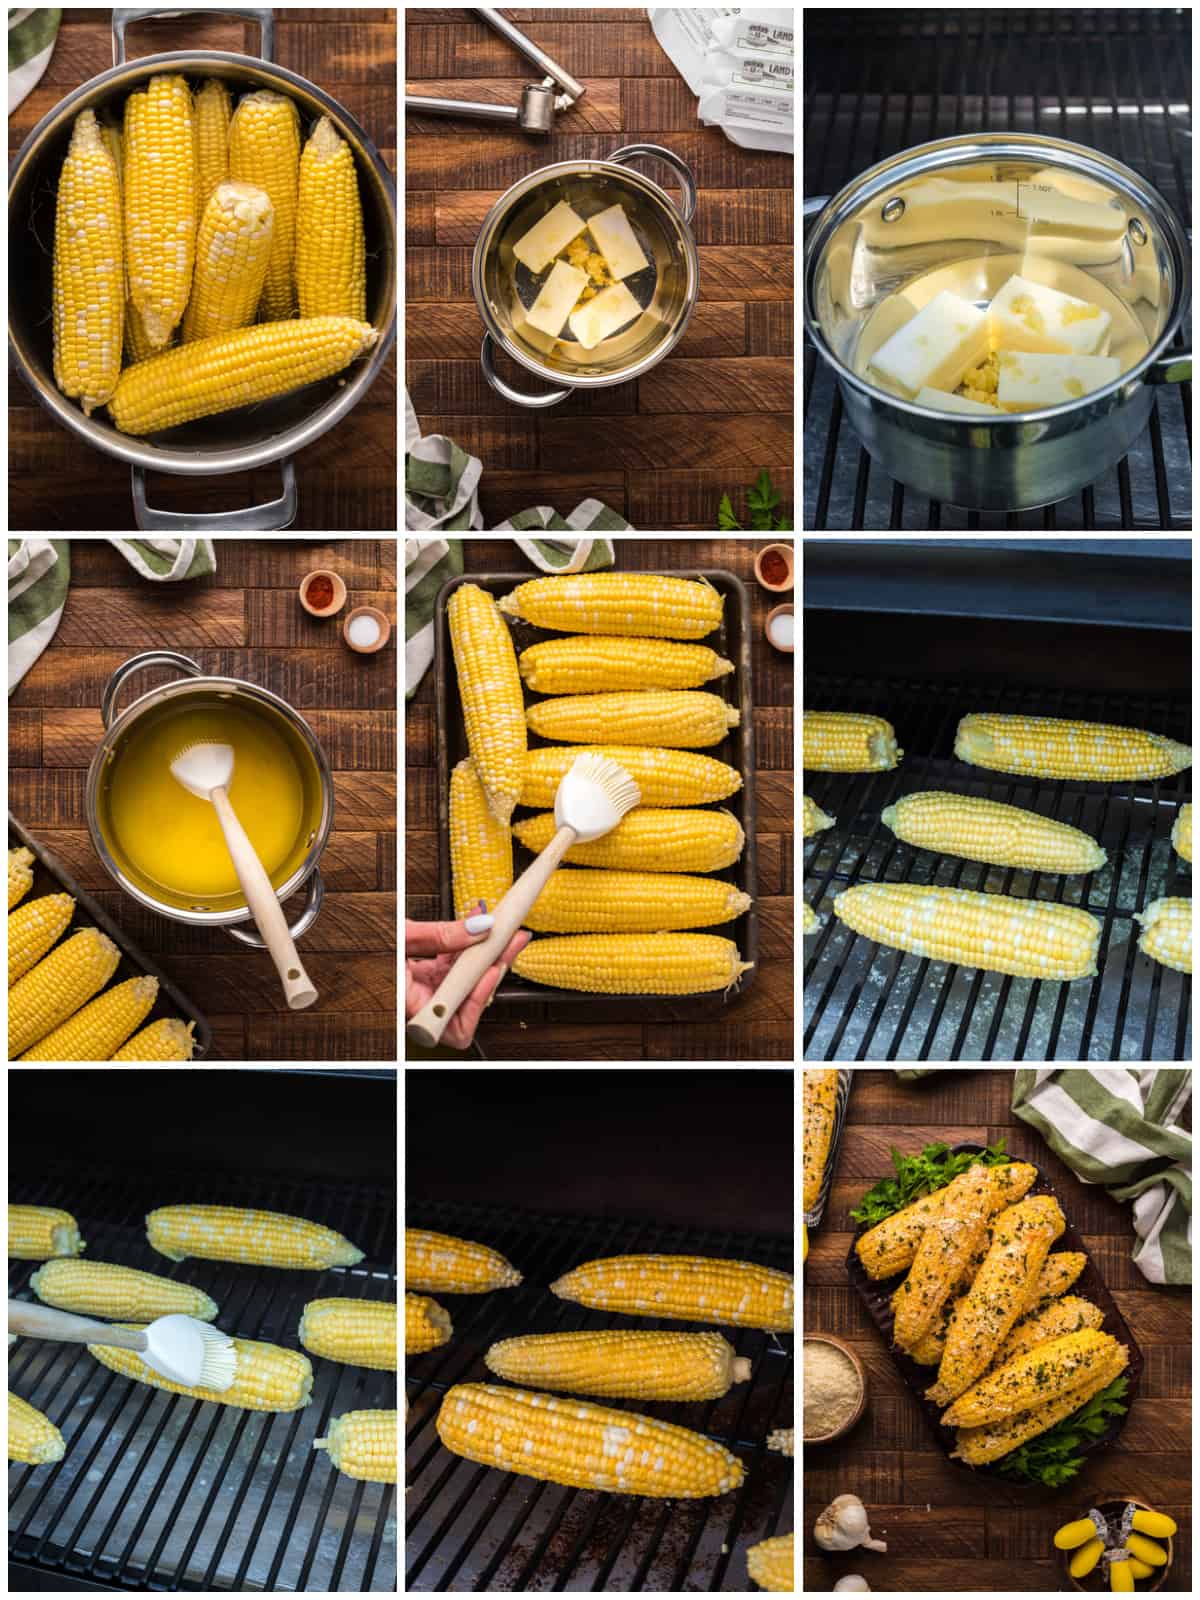 Step by step photos on how to make Smoked Corn on the Cob.